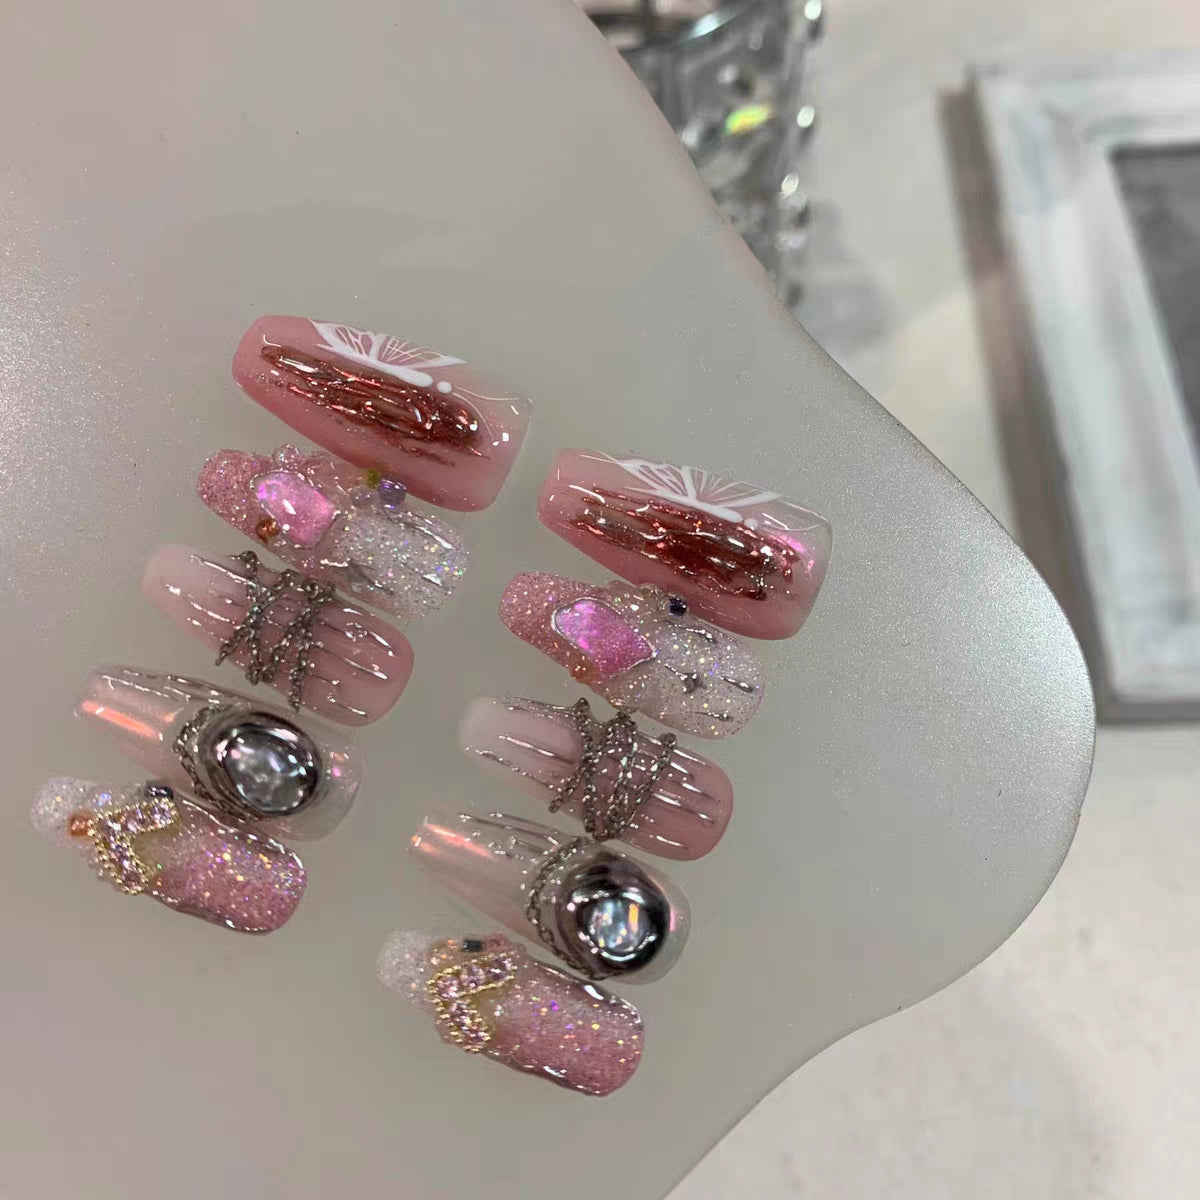 Wearing Nail Customized Advanced Japanese Pink and Daisy Handmade Nail Enhancement Finished False Nail Patch Heavy Industry Metal Sweet Cool Spicy Girl